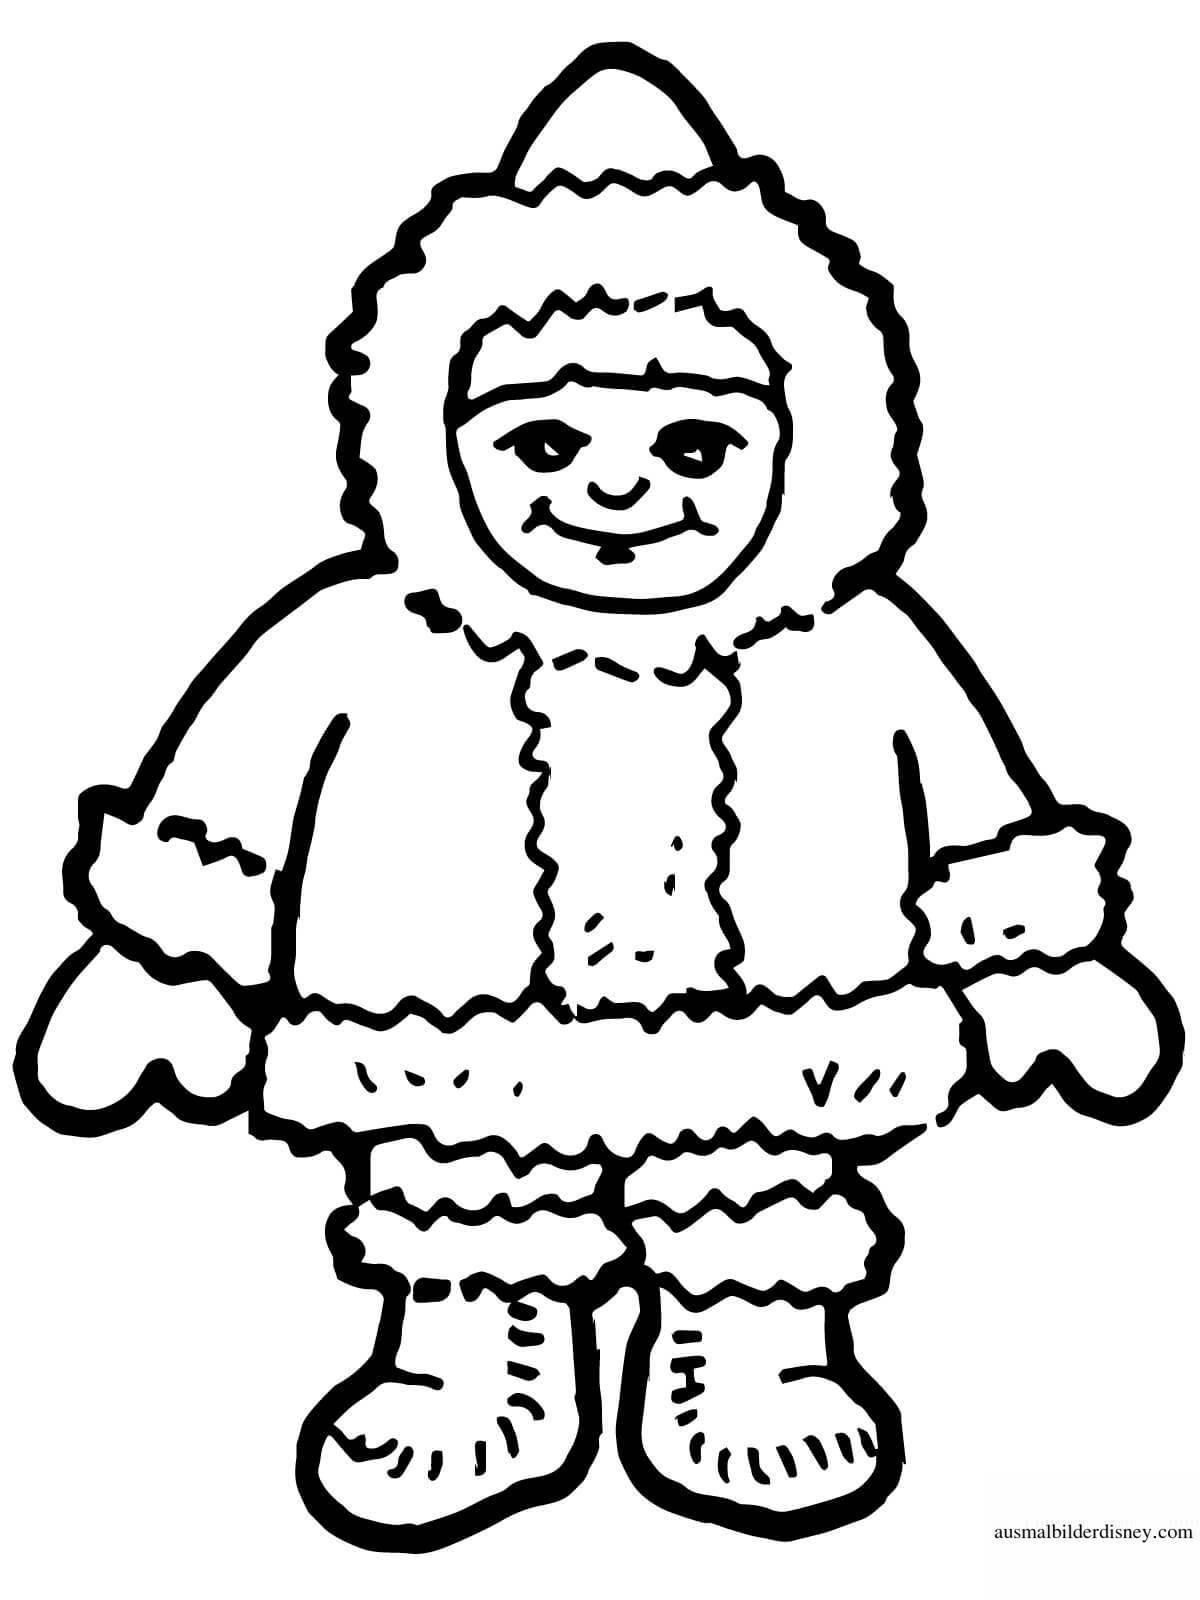 Playful eskimo children coloring page